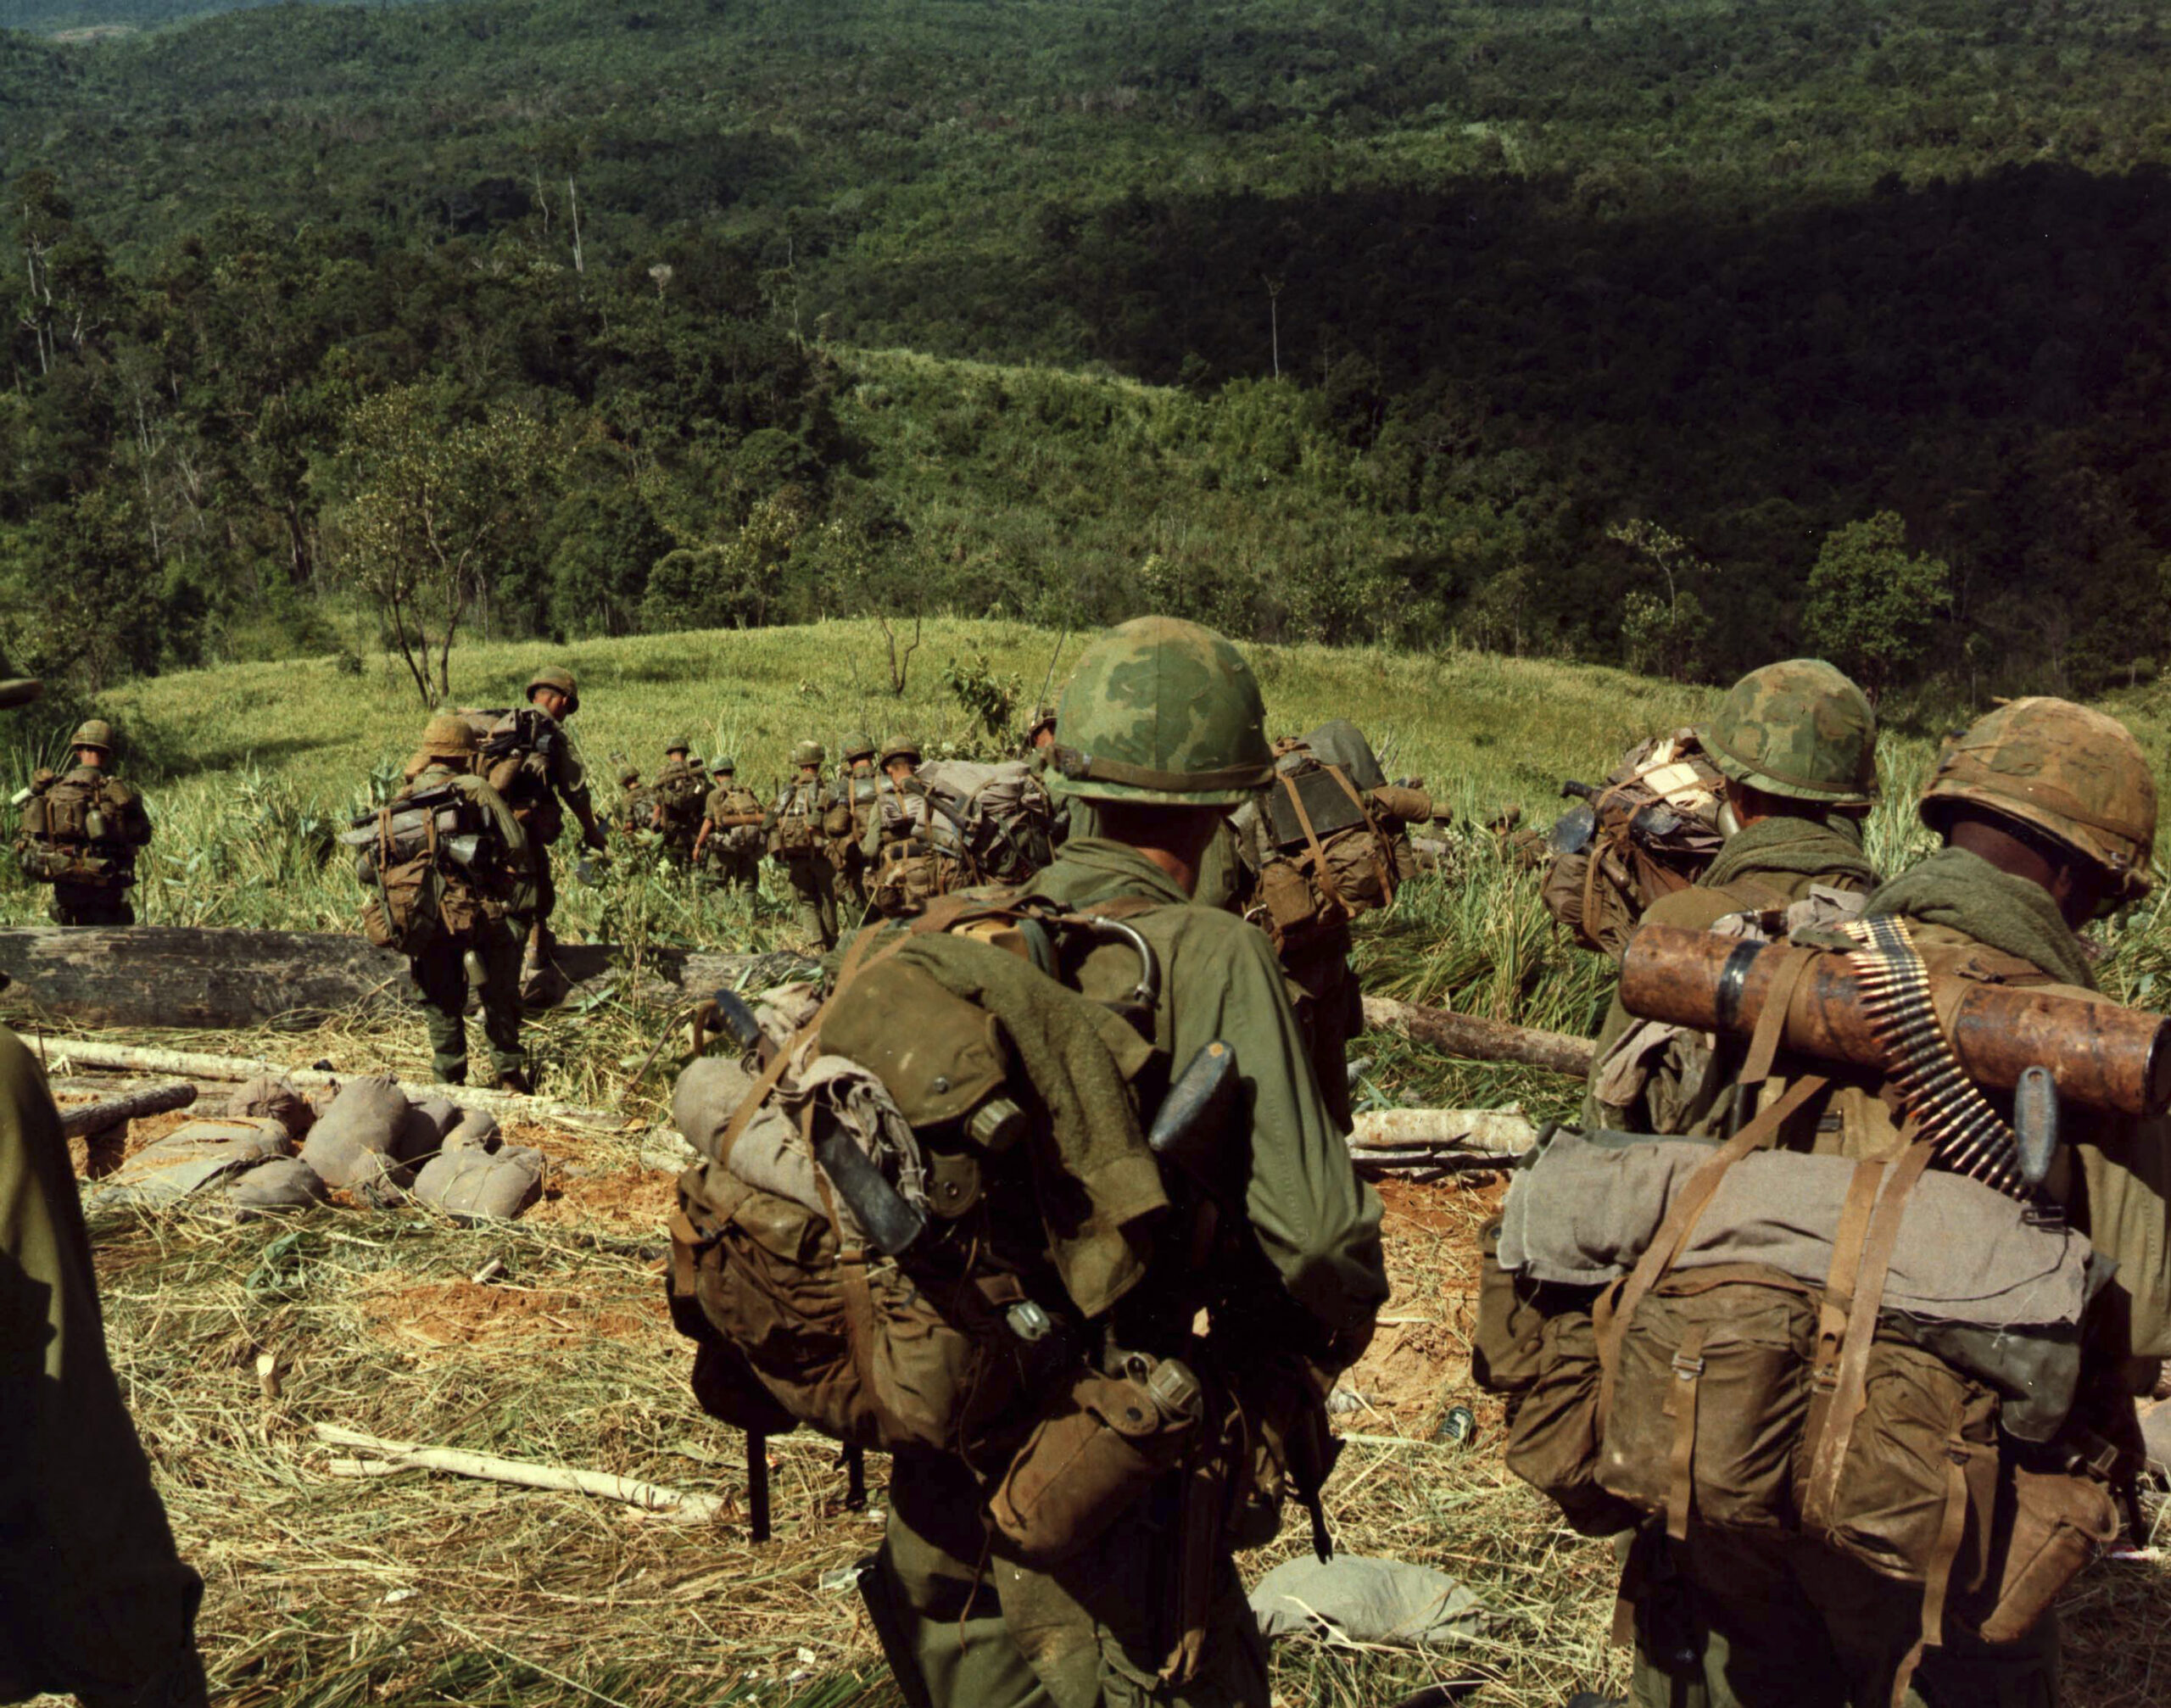 November 14-17, 1967 - Soldiers descend the side of Hill 742, located five miles northwest of Dak To, Vietnam. (Stocktrek Images/Getty Images)